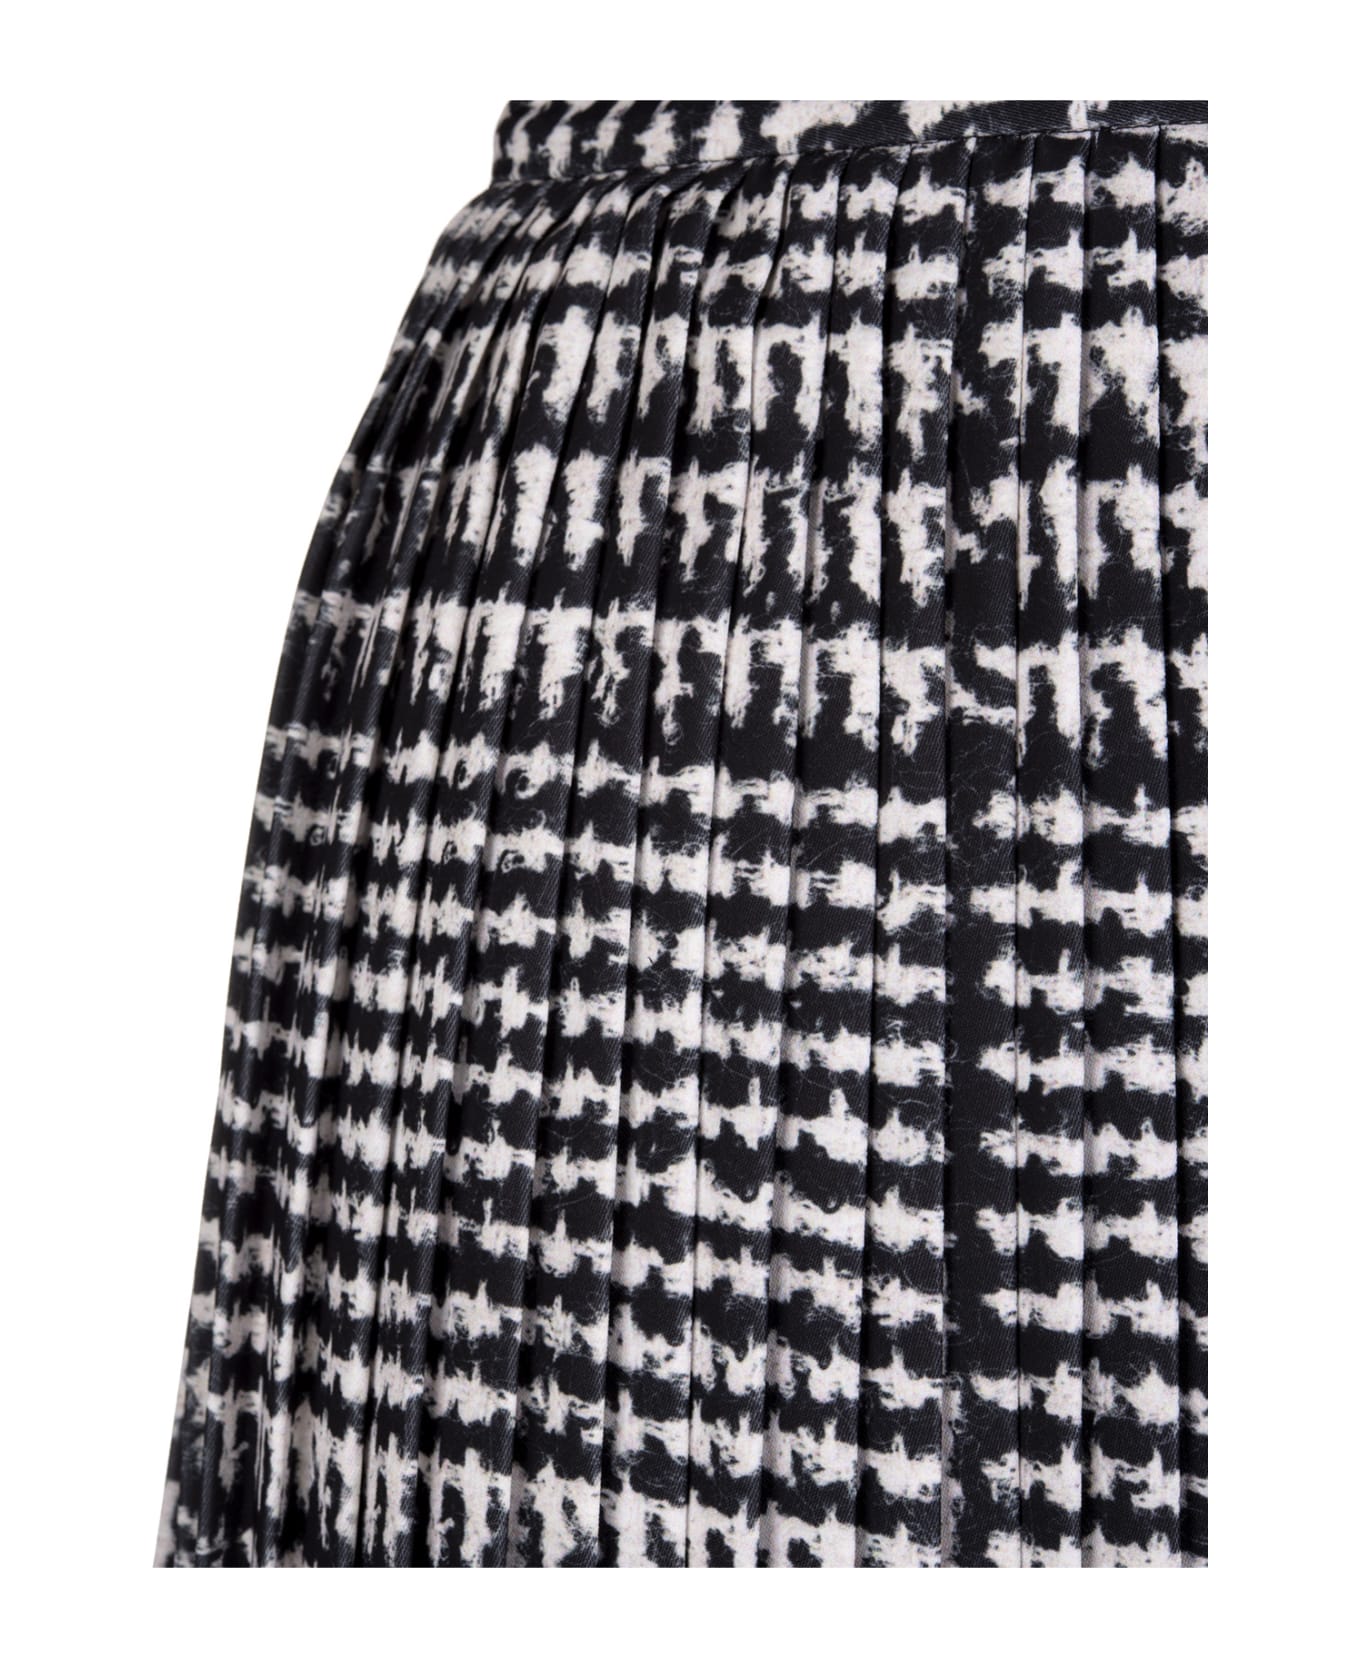 Ermanno Scervino Cady Trouser Skirt With Prince Of Wales Print - BLACK/WHITE スカート